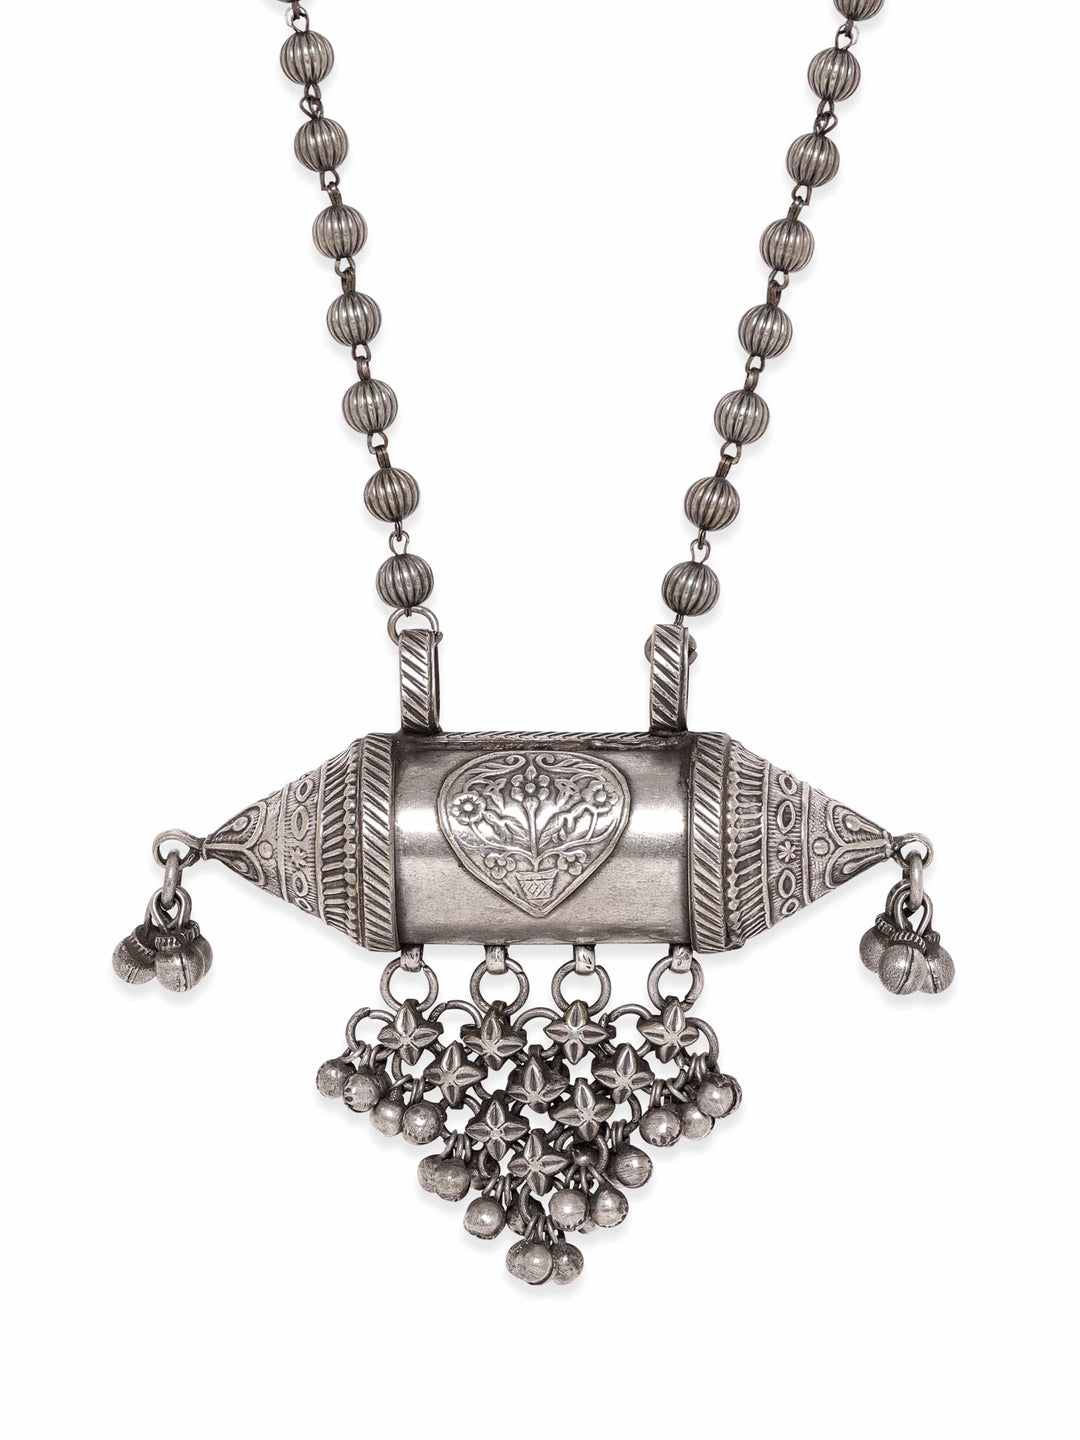 Rubans Bohemian Blossoms Oxidized Silver Plated Floral Necklace with Ghungroo Hangings Necklace